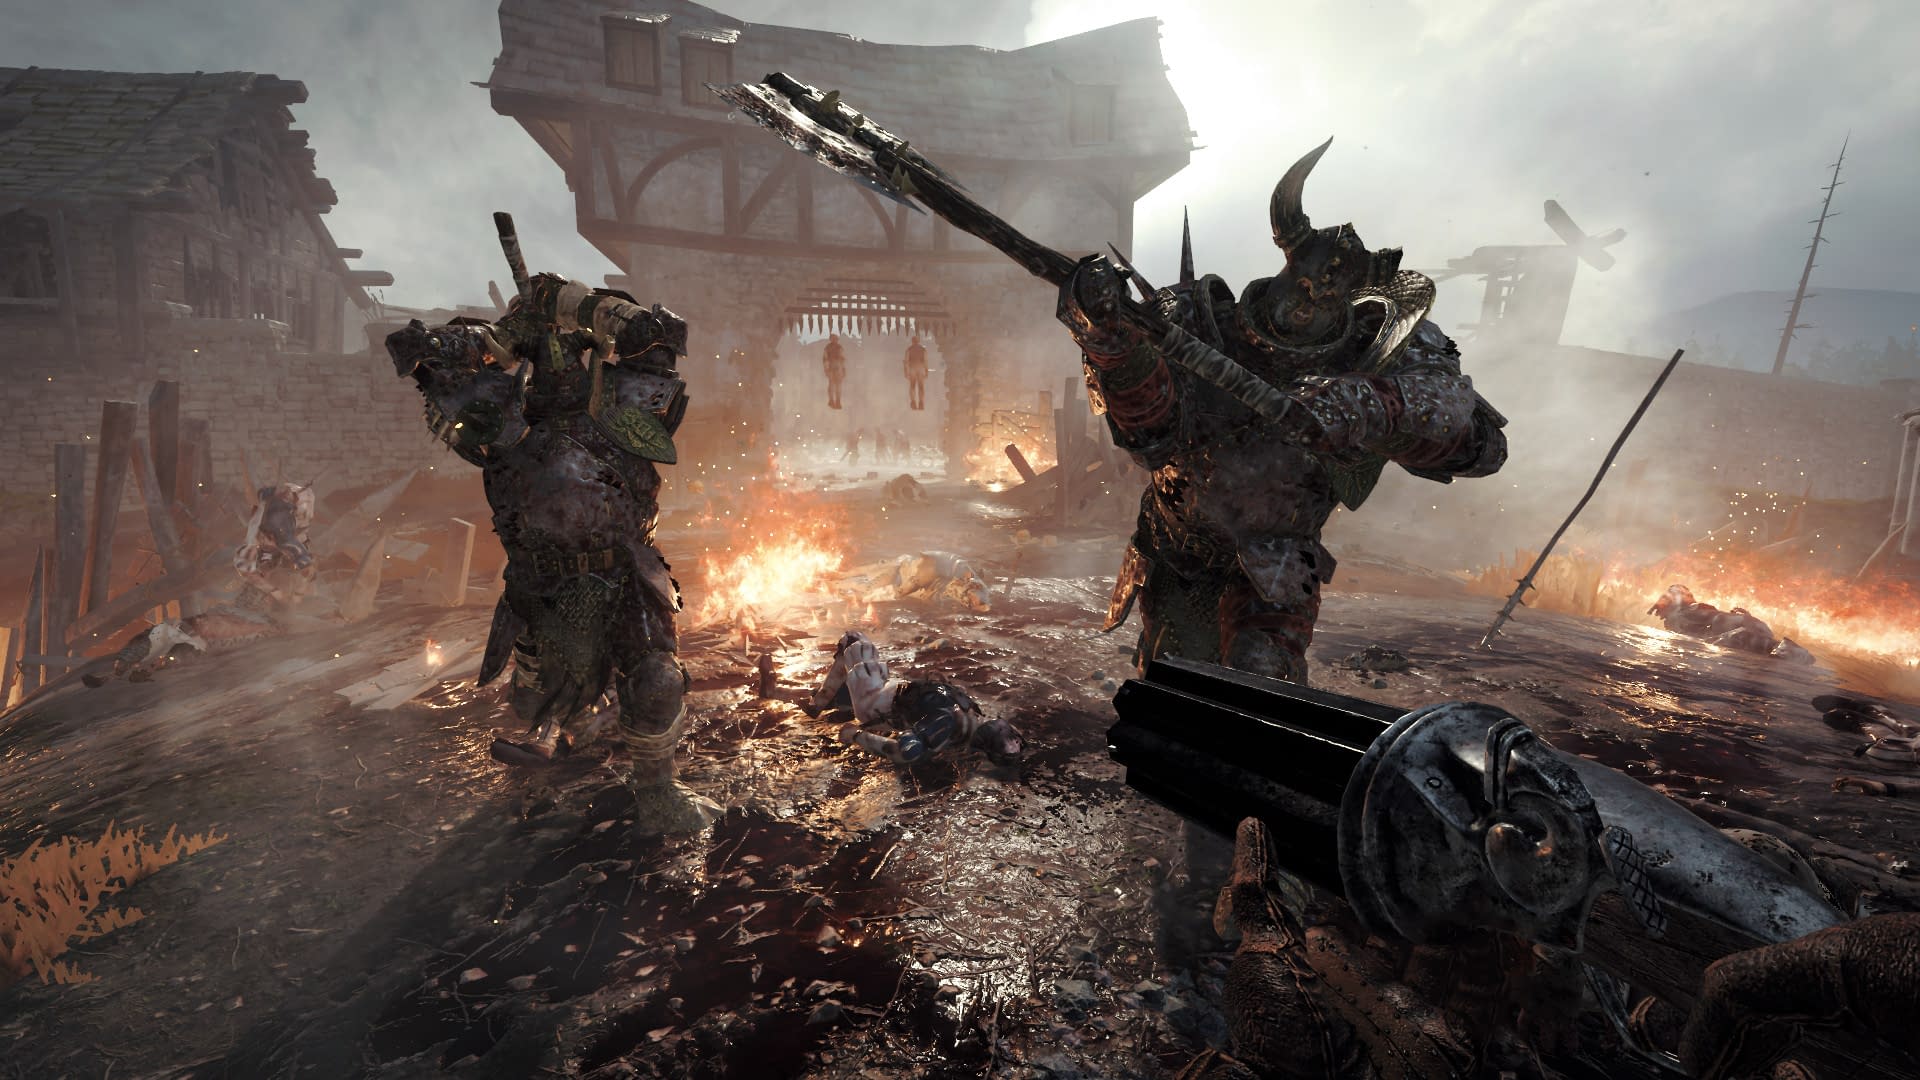 Don’t forget to add Warhammer: Vermintide 2 to your Steam Library!